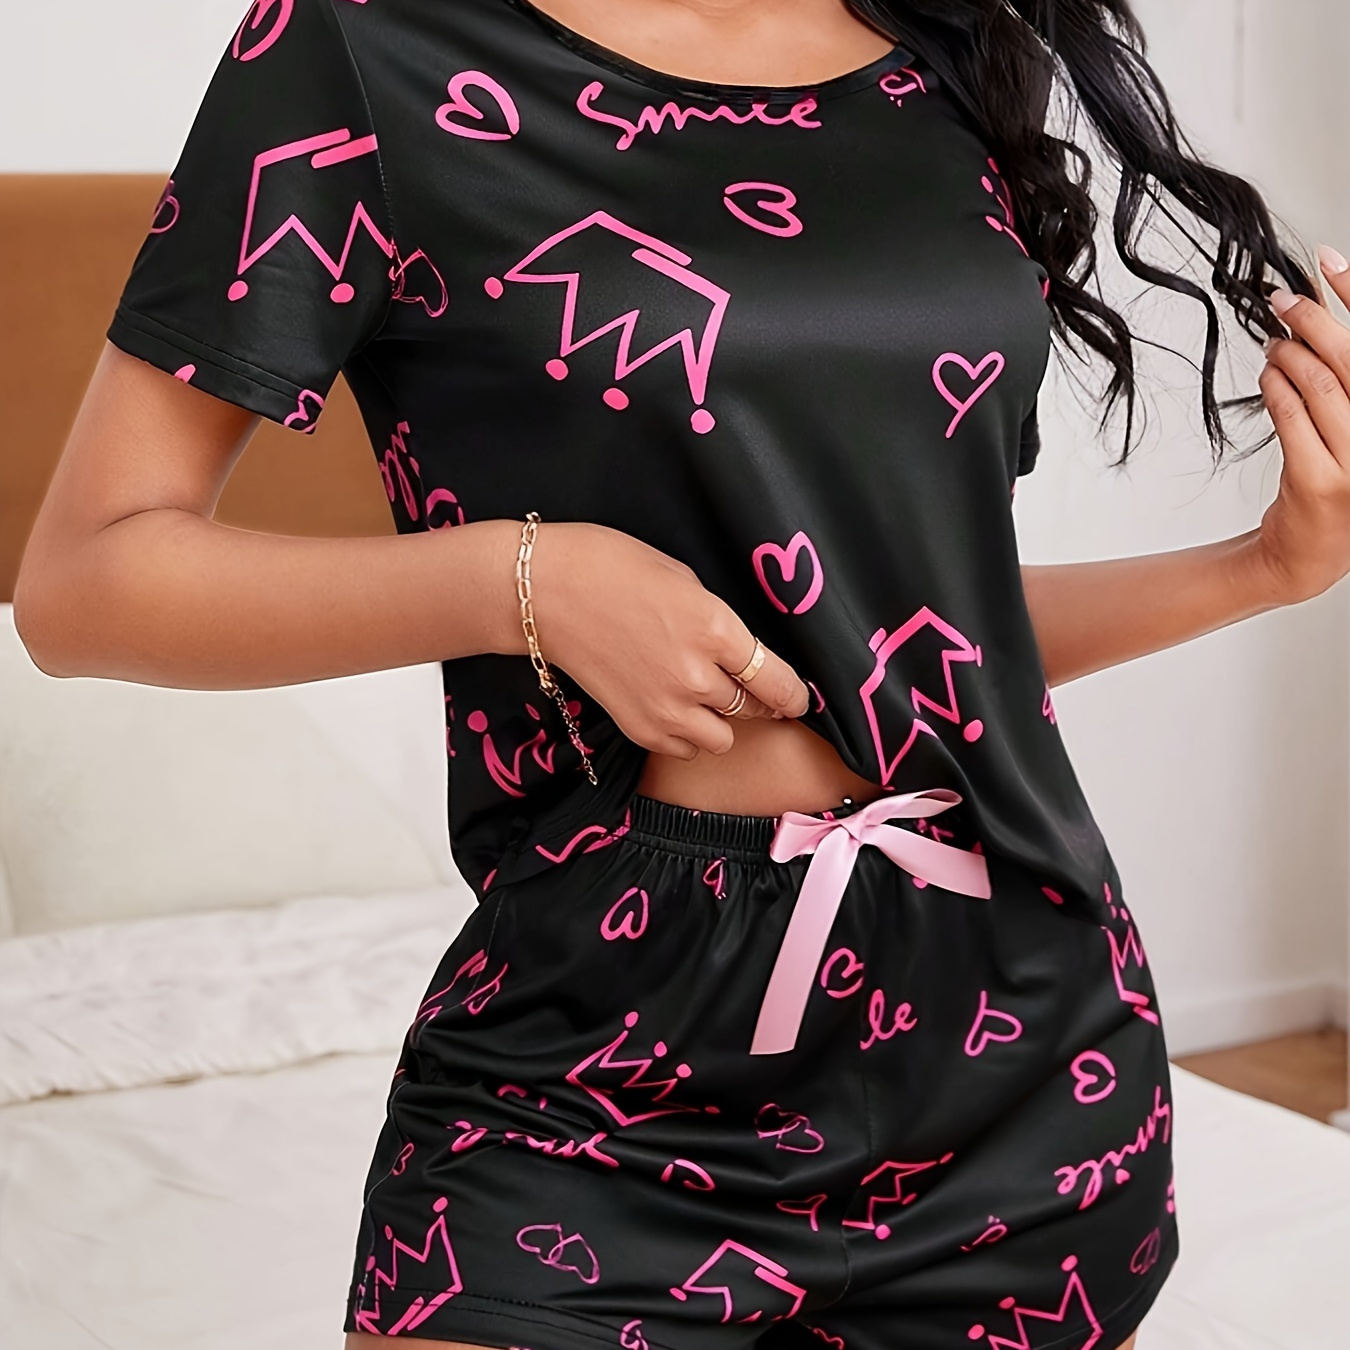 

Women's Crown & Heart & Letter Print Casual Pajama Set, Short Sleeve Round Neck Top & Shorts, Comfortable Relaxed Fit, Summer Nightwear